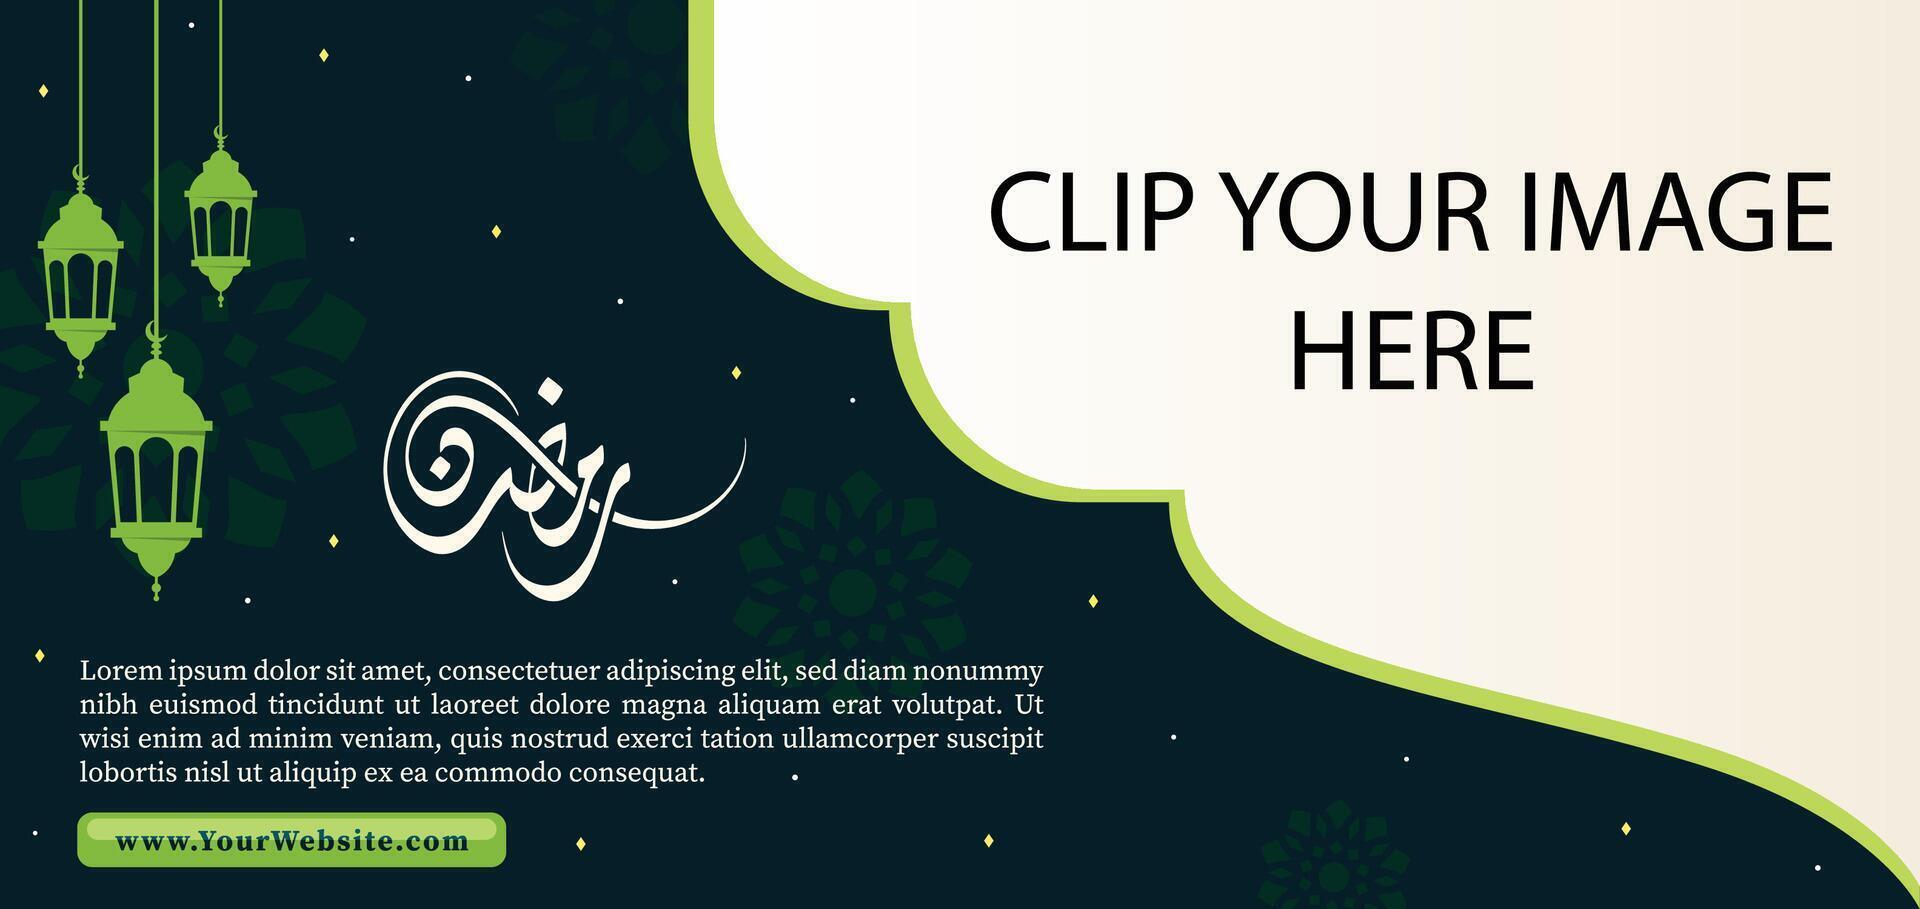 Green Islamic Background Banner Design with Simple Ornaments vector